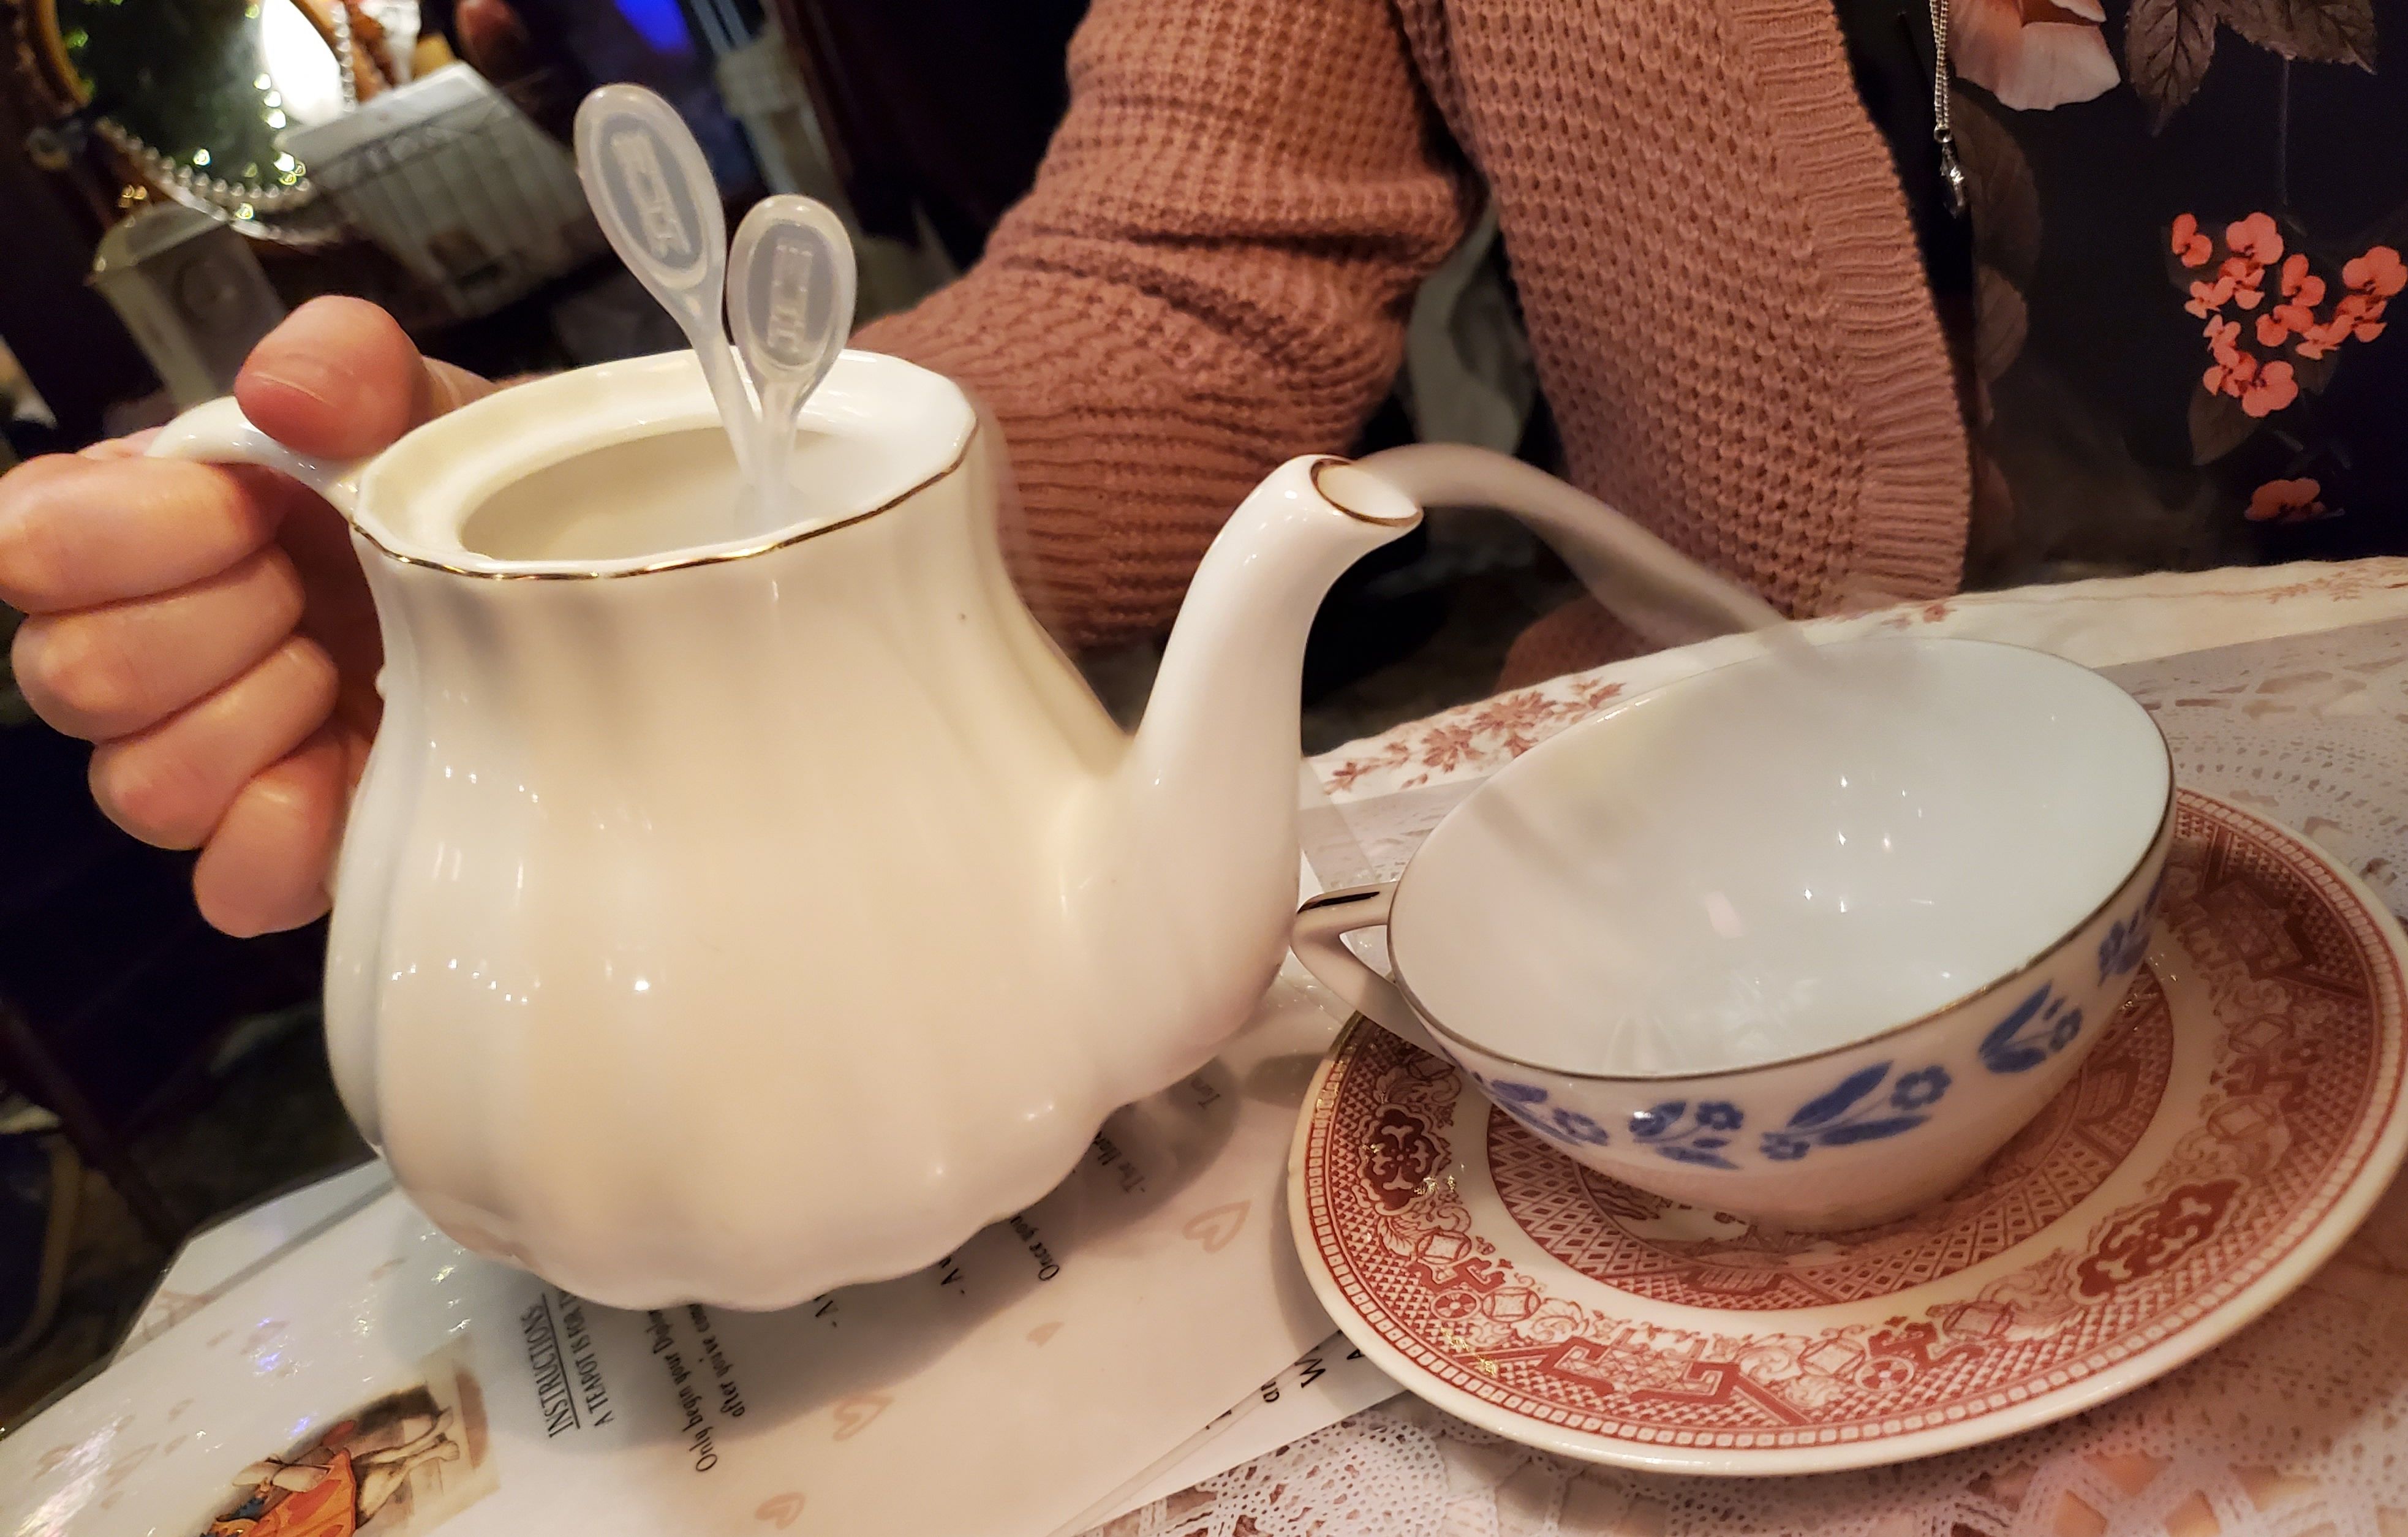 A tea pot "steams" with dry ice as its contents are poured into a tea cup